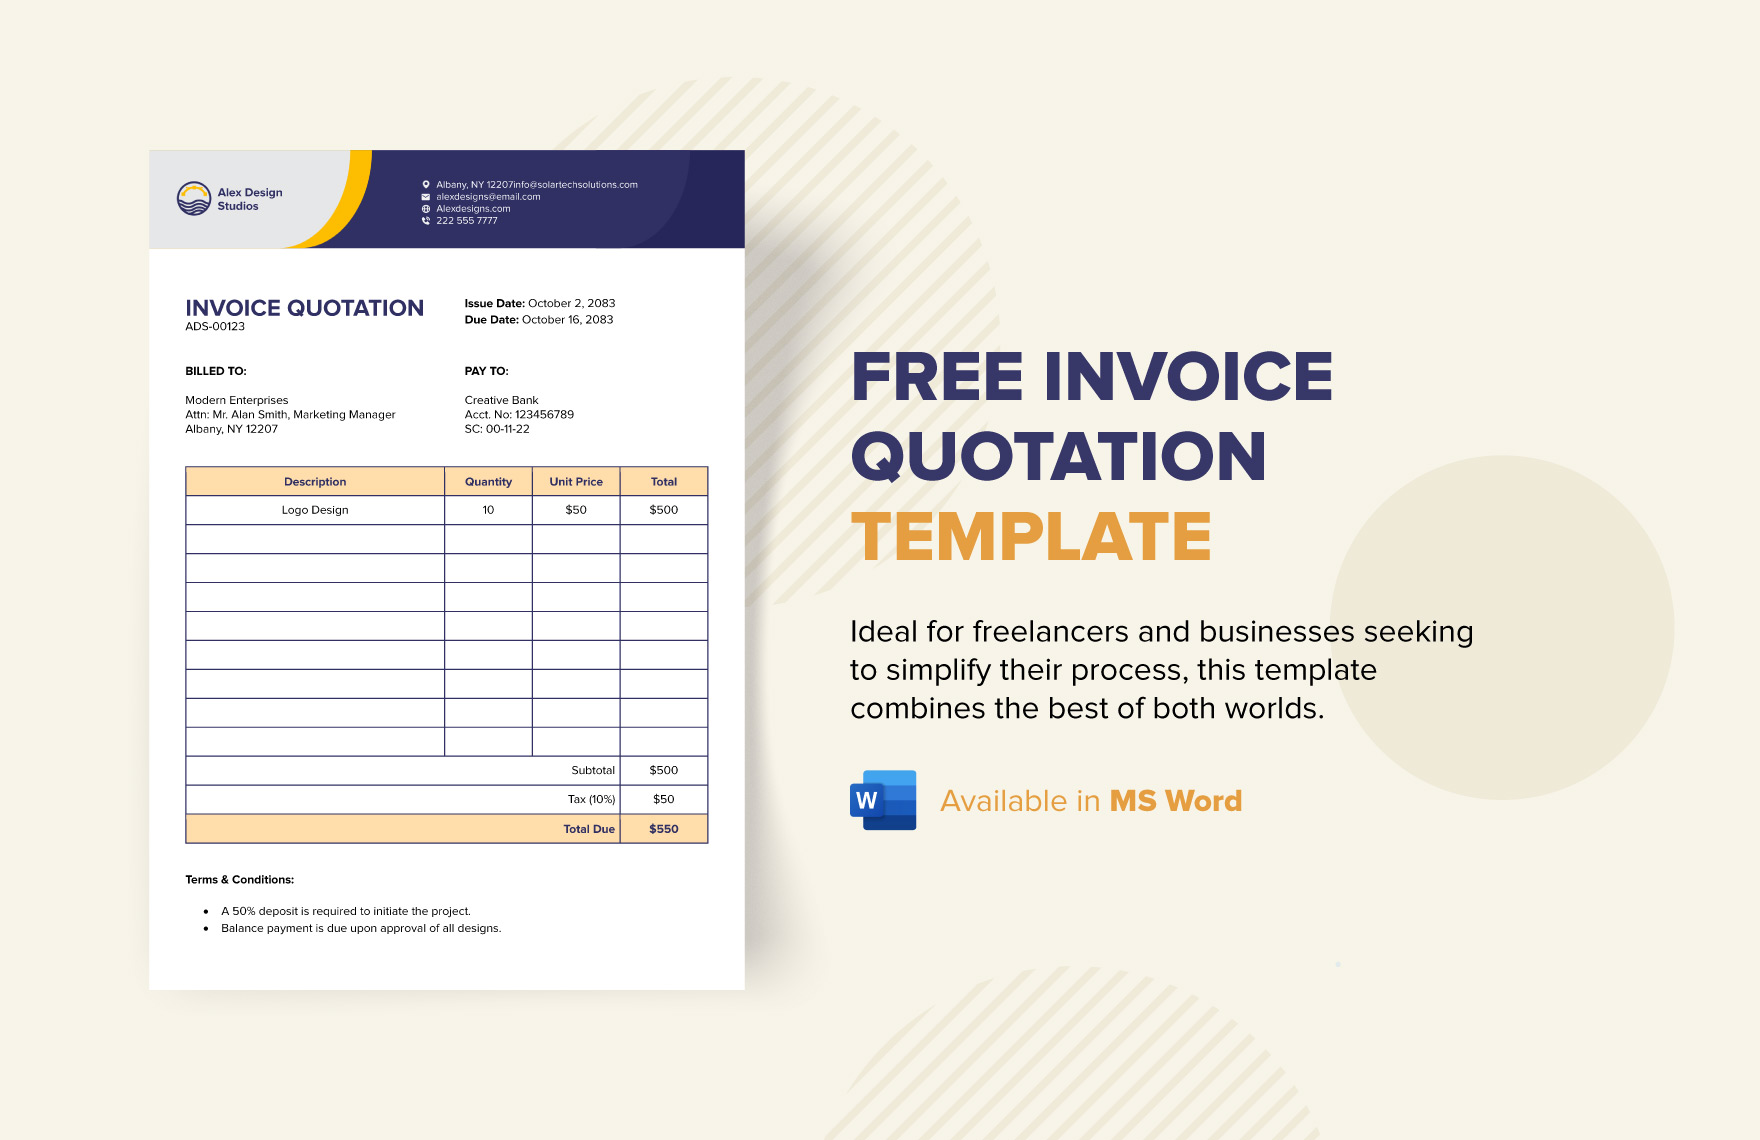 Free Invoice Quotation Template